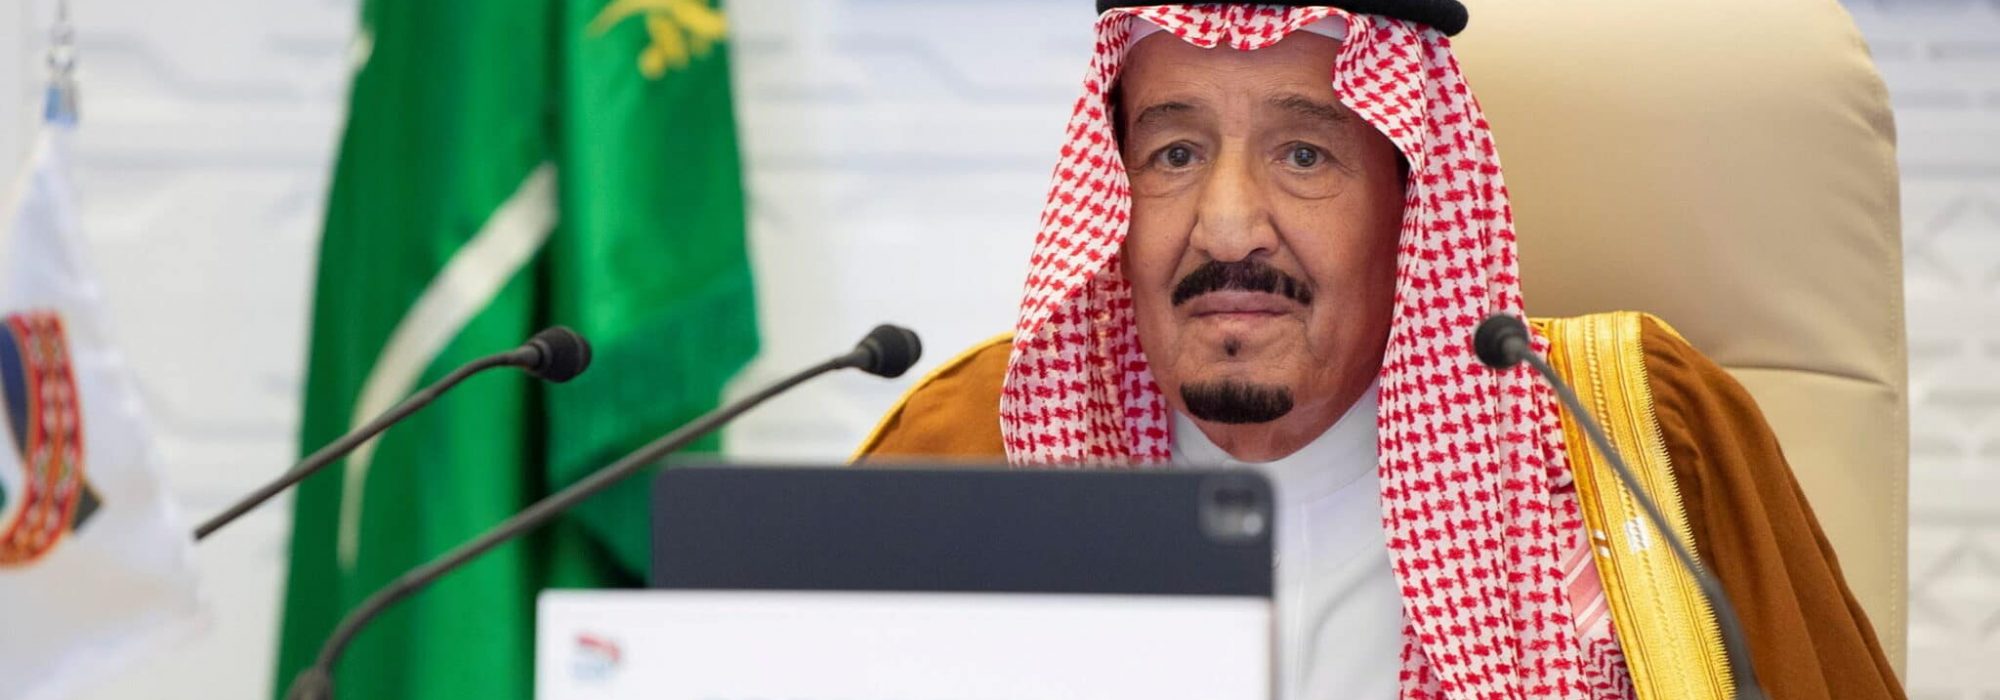 Saudi King Salman bin Abdulaziz gives a virtual speech during an opening session of the 15th annual G20 Leaders' Summit in Riyadh, Saudi Arabia, November 21, 2020. Bandar Algaloud/Courtesy of Saudi Royal Court/Handout ATTENTION EDITORS - THIS PICTURE WAS PROVIDED BY A THIRD PARTY,Image: 570200986, License: Rights-managed, Restrictions: THIS IMAGE HAS BEEN SUPPLIED BY A THIRD PARTY. IT IS DISTRIBUTED, EXACTLY AS RECEIVED BY REUTERS, AS A SERVICE TO CLIENTS., Model Release: no, Credit line: BANDER ALGALOUD / Reuters / Forum